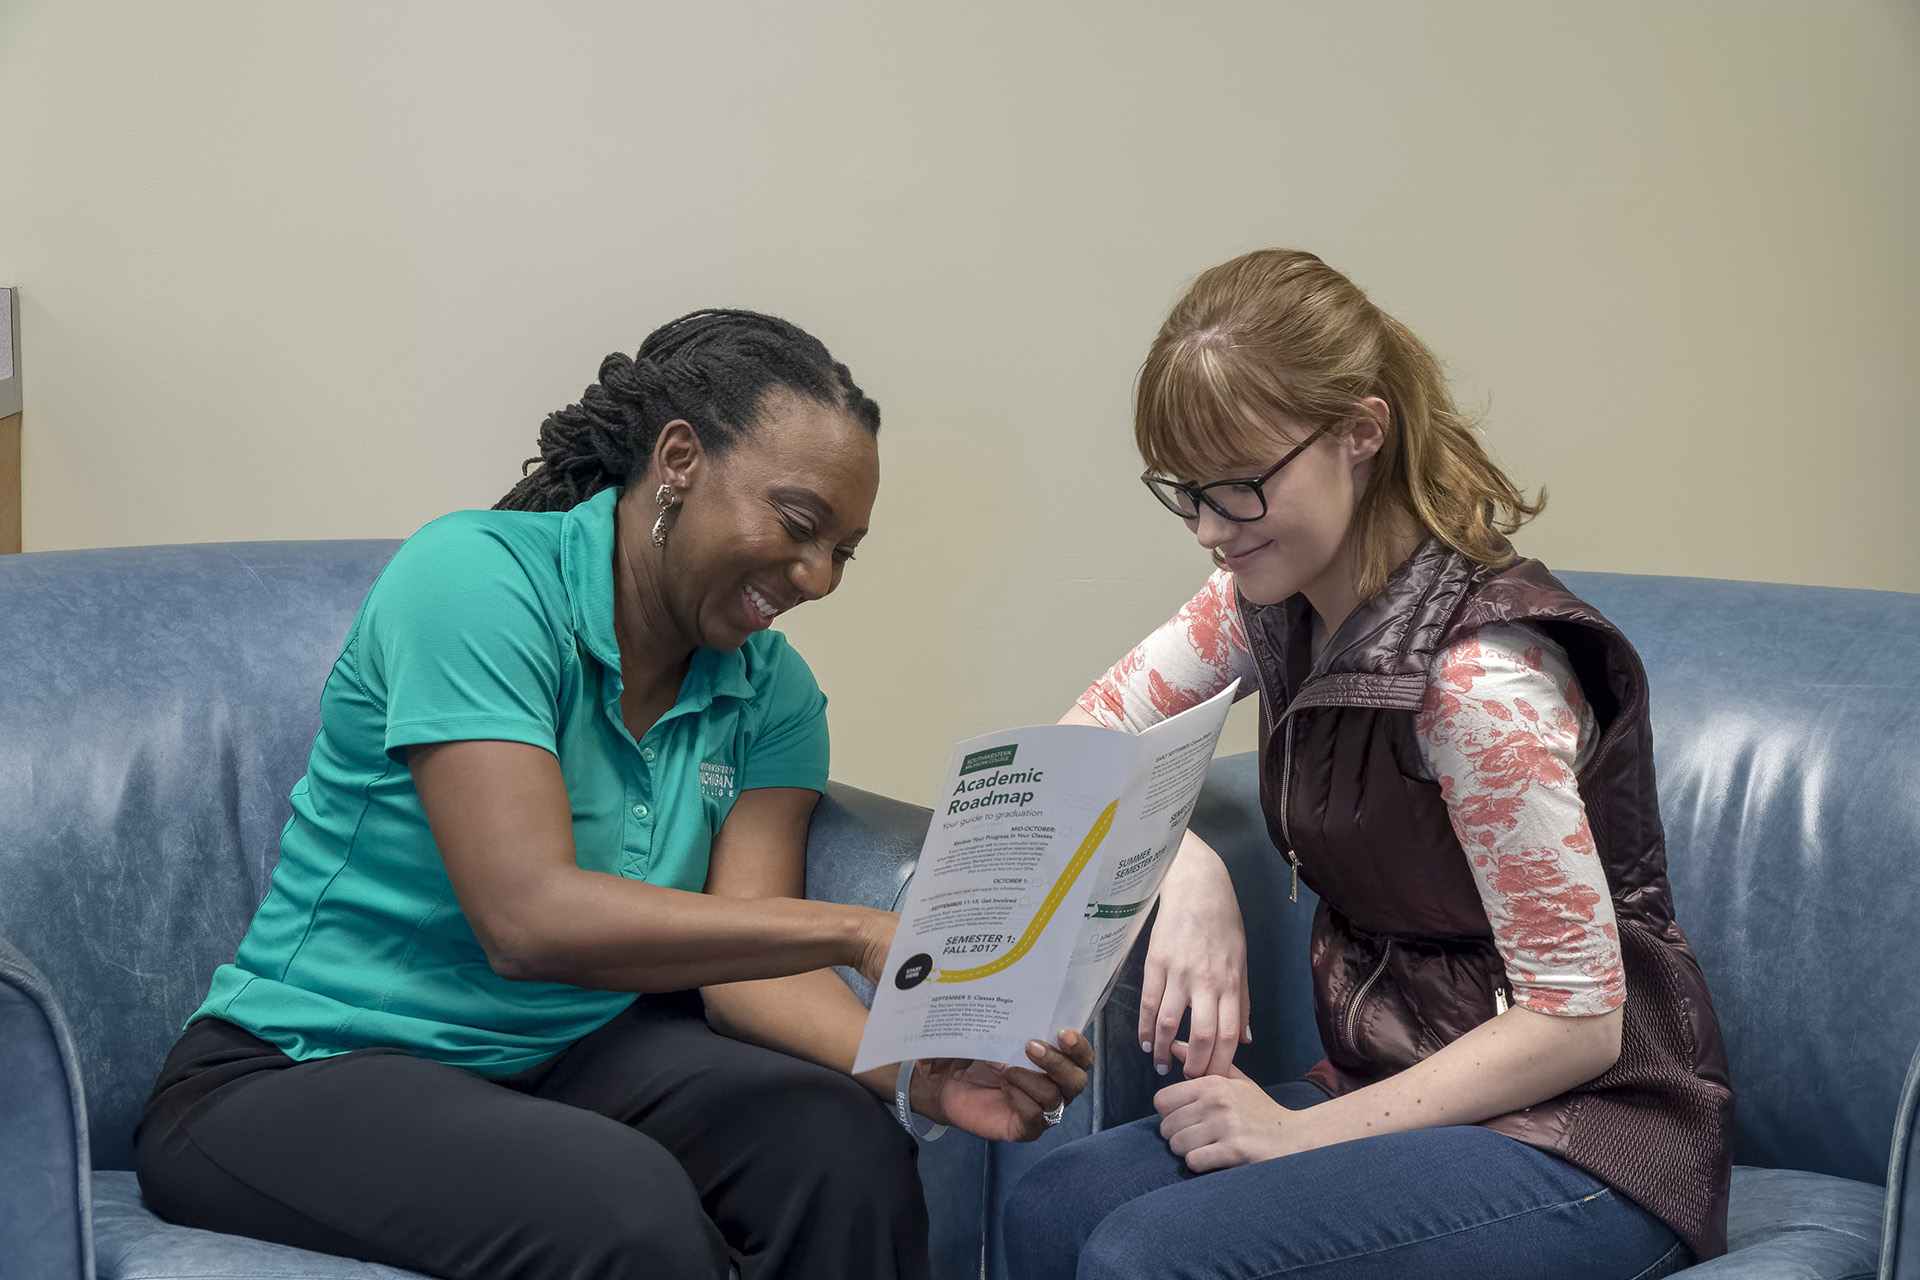 A student receiving advising